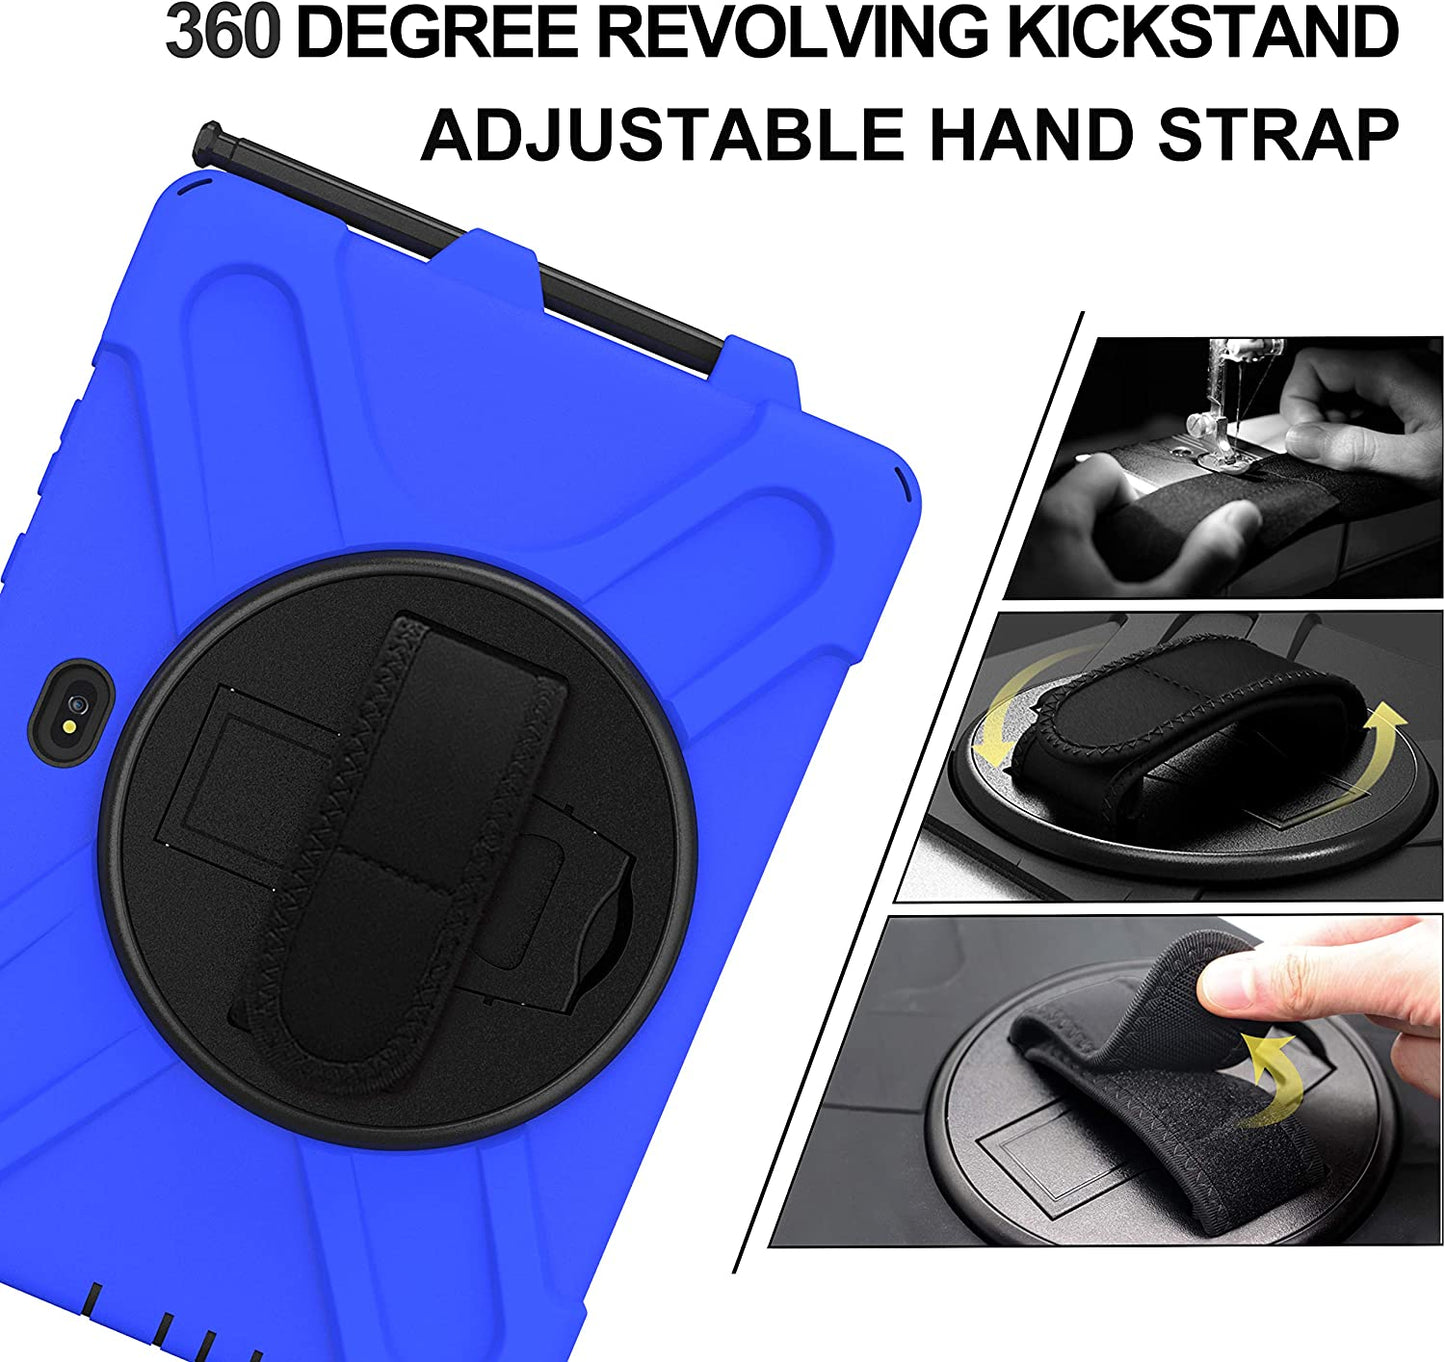 Case for Samsung Galaxy Tab Active Pro 10.1 T540 T545 T547, Military Grade [15 ft Drop Tested] Full-Body Shockproof Protective Cover with 360? Rotation Stand, Hand Strap & Pencil Holder (Black)